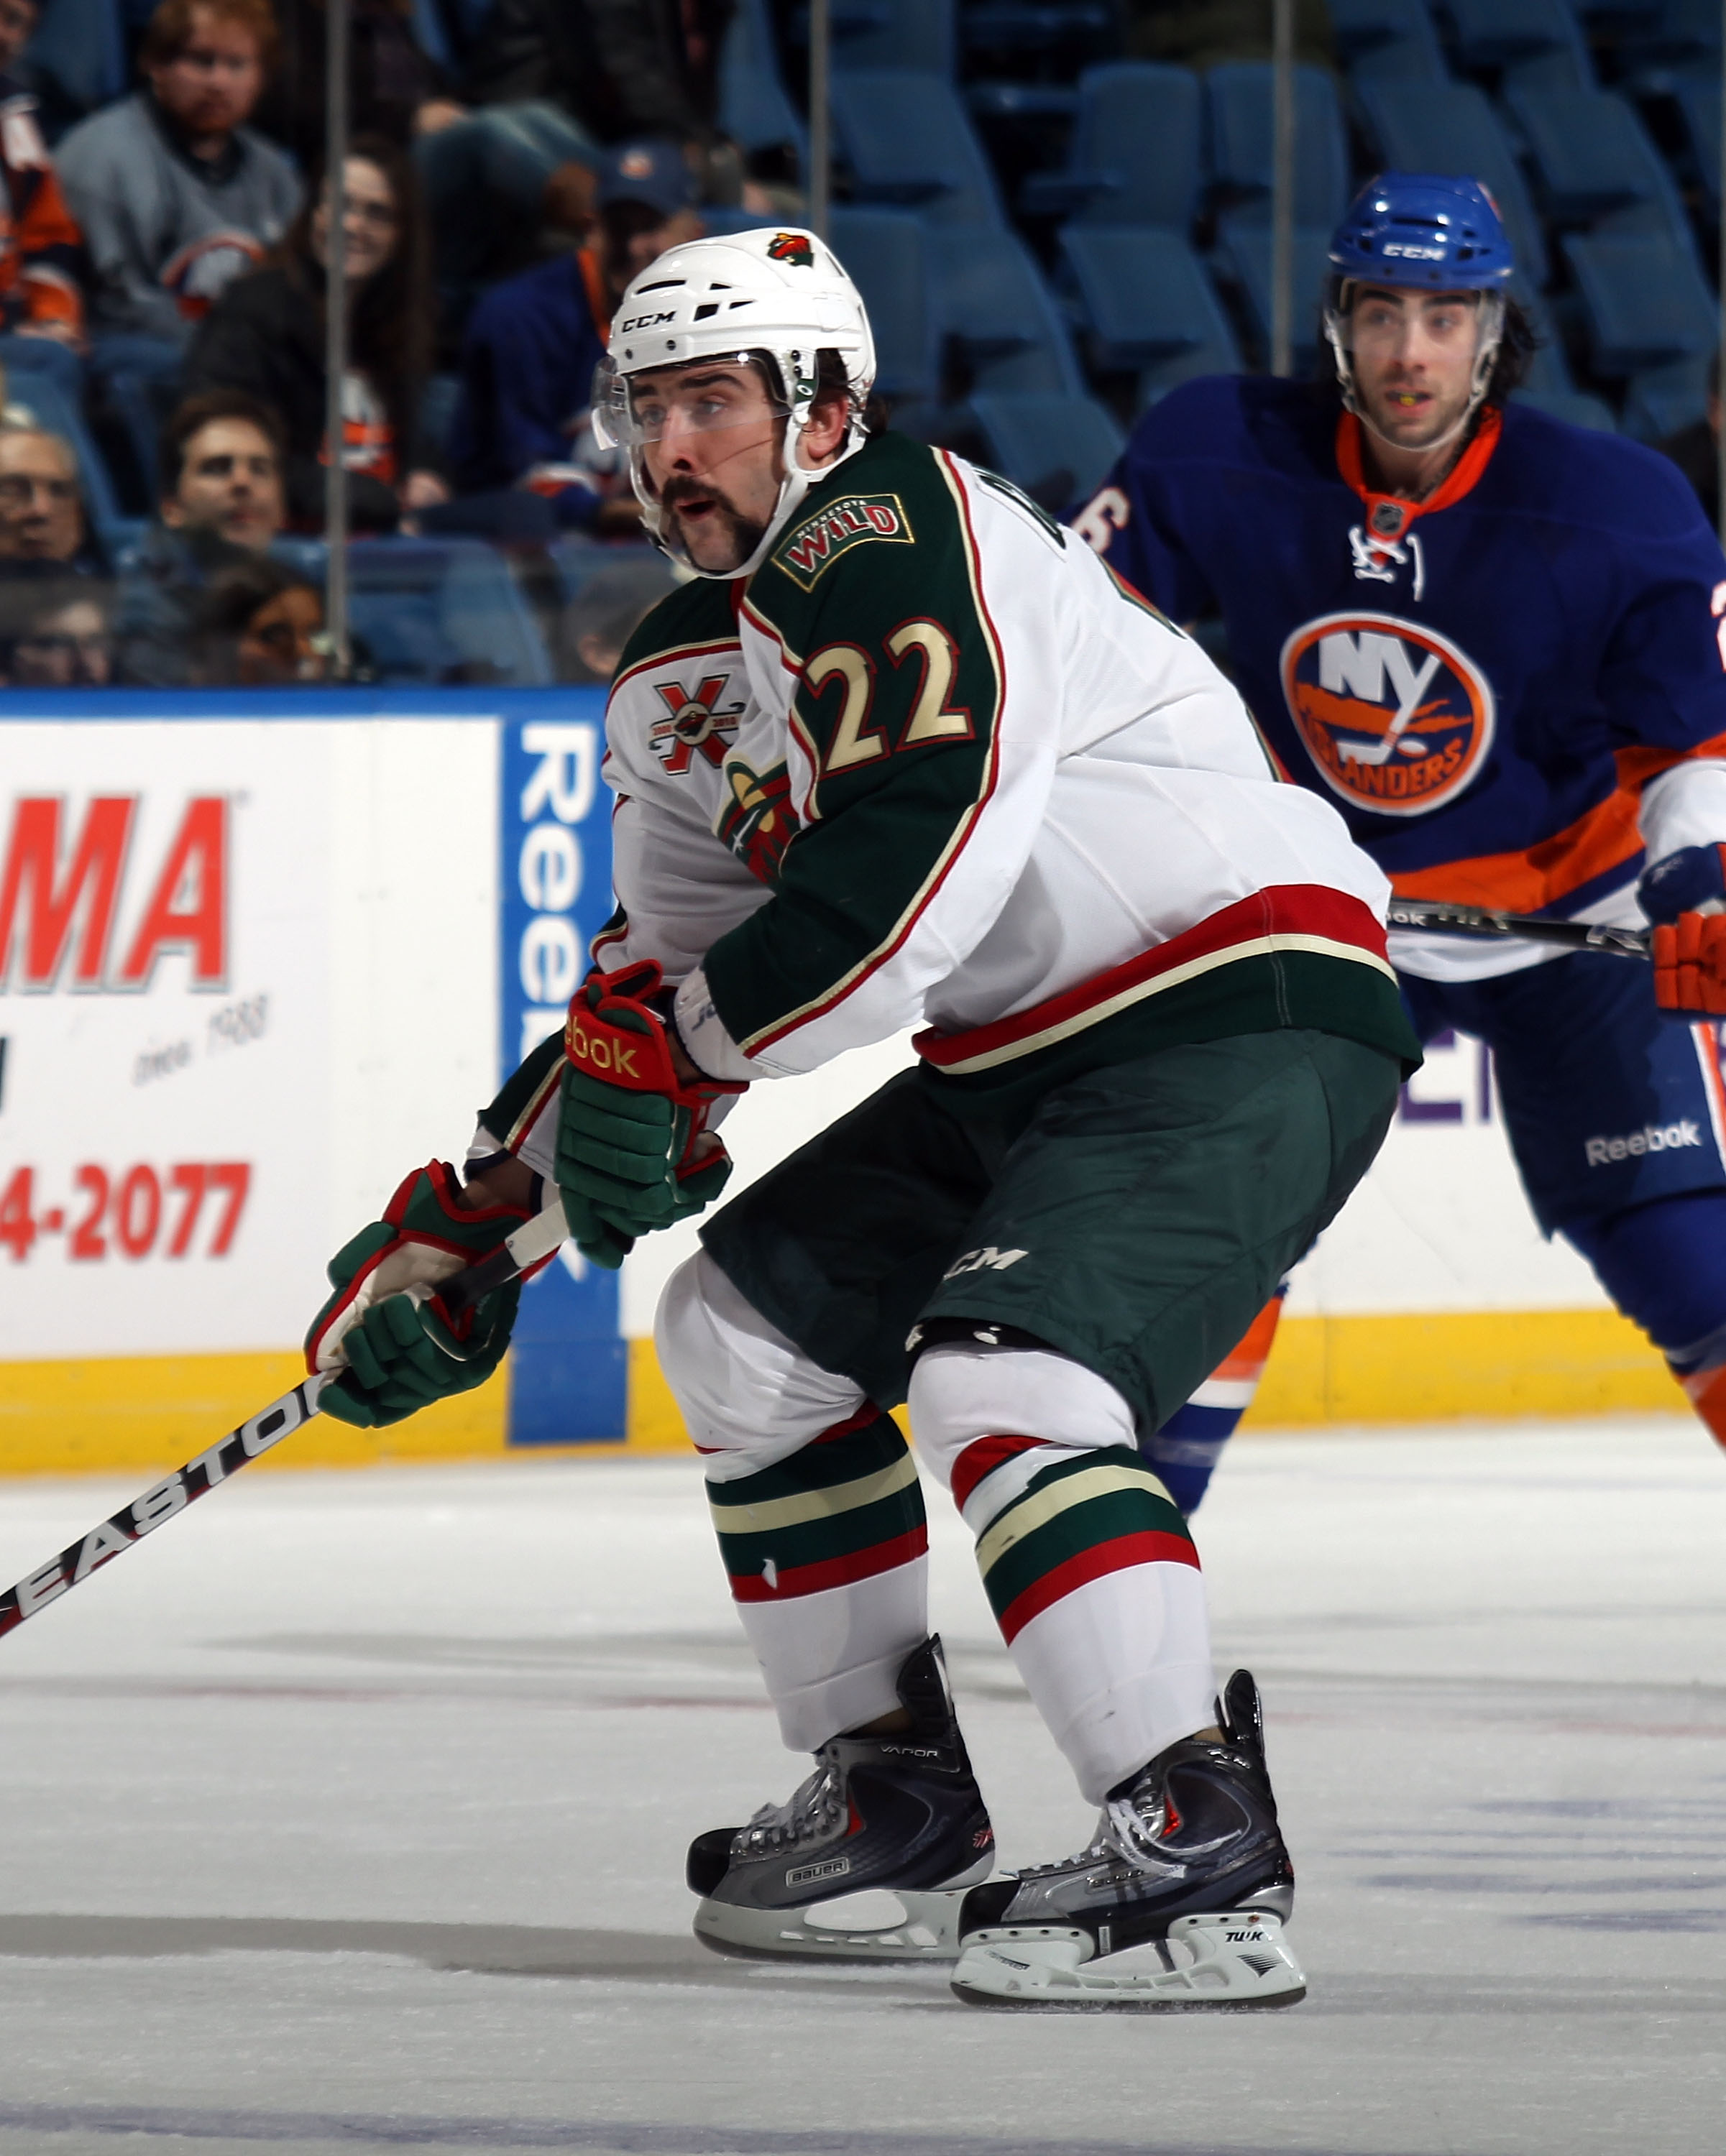 Cal Clutterbuck of the Minnesota Wild skates against the New